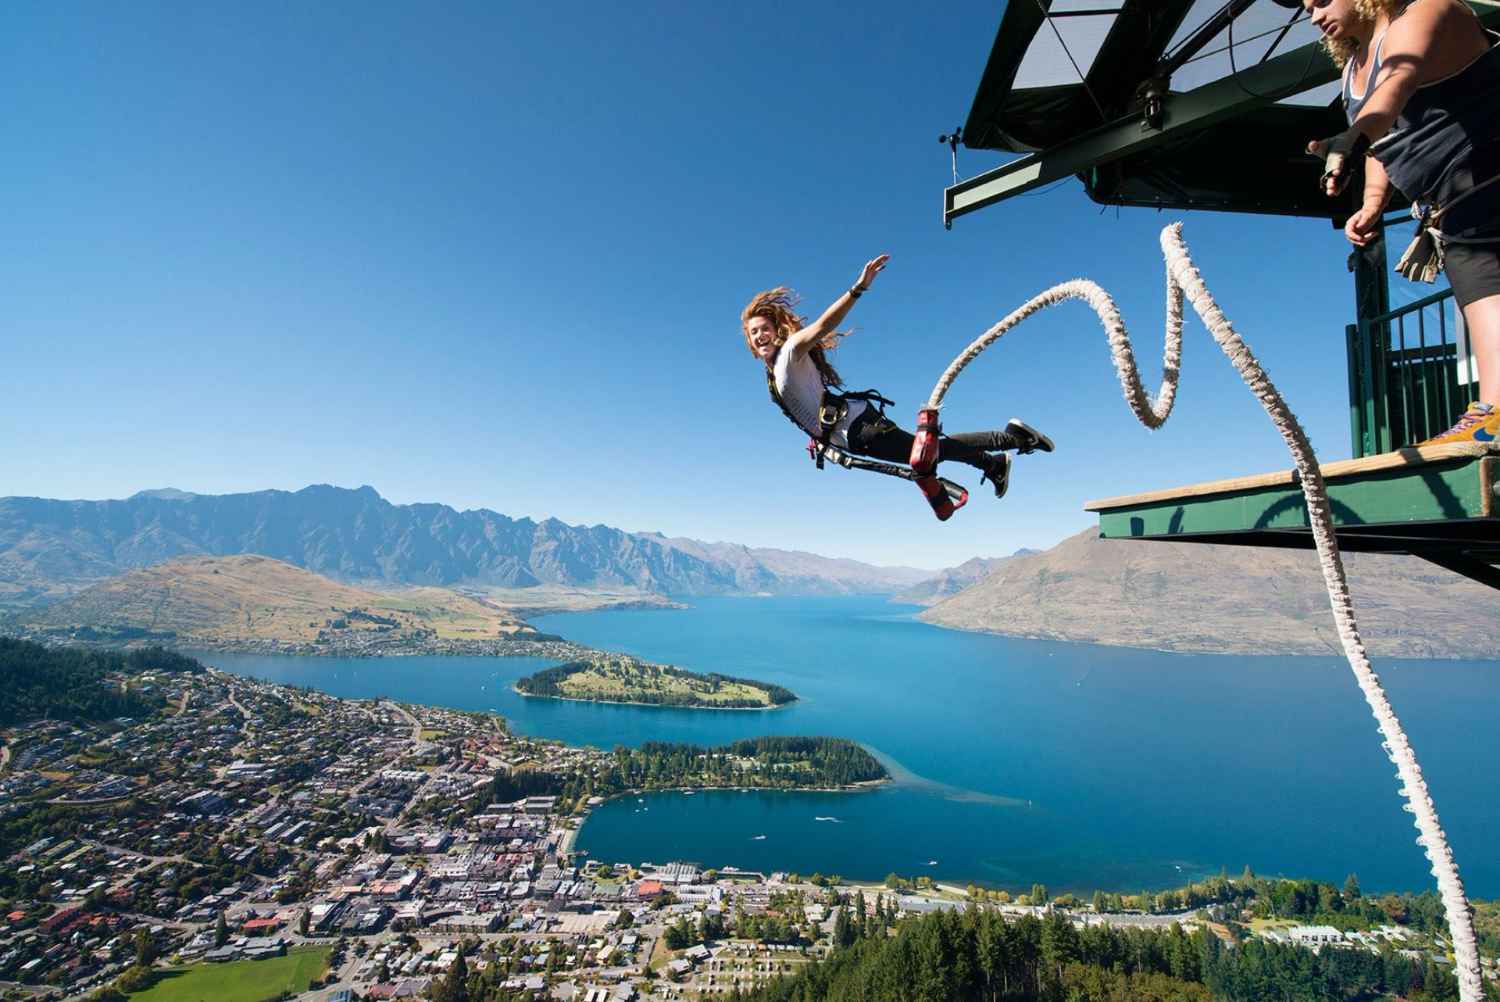 woman-bungee-jumping-from-aj-hackett-ledge-with-lake-in-background